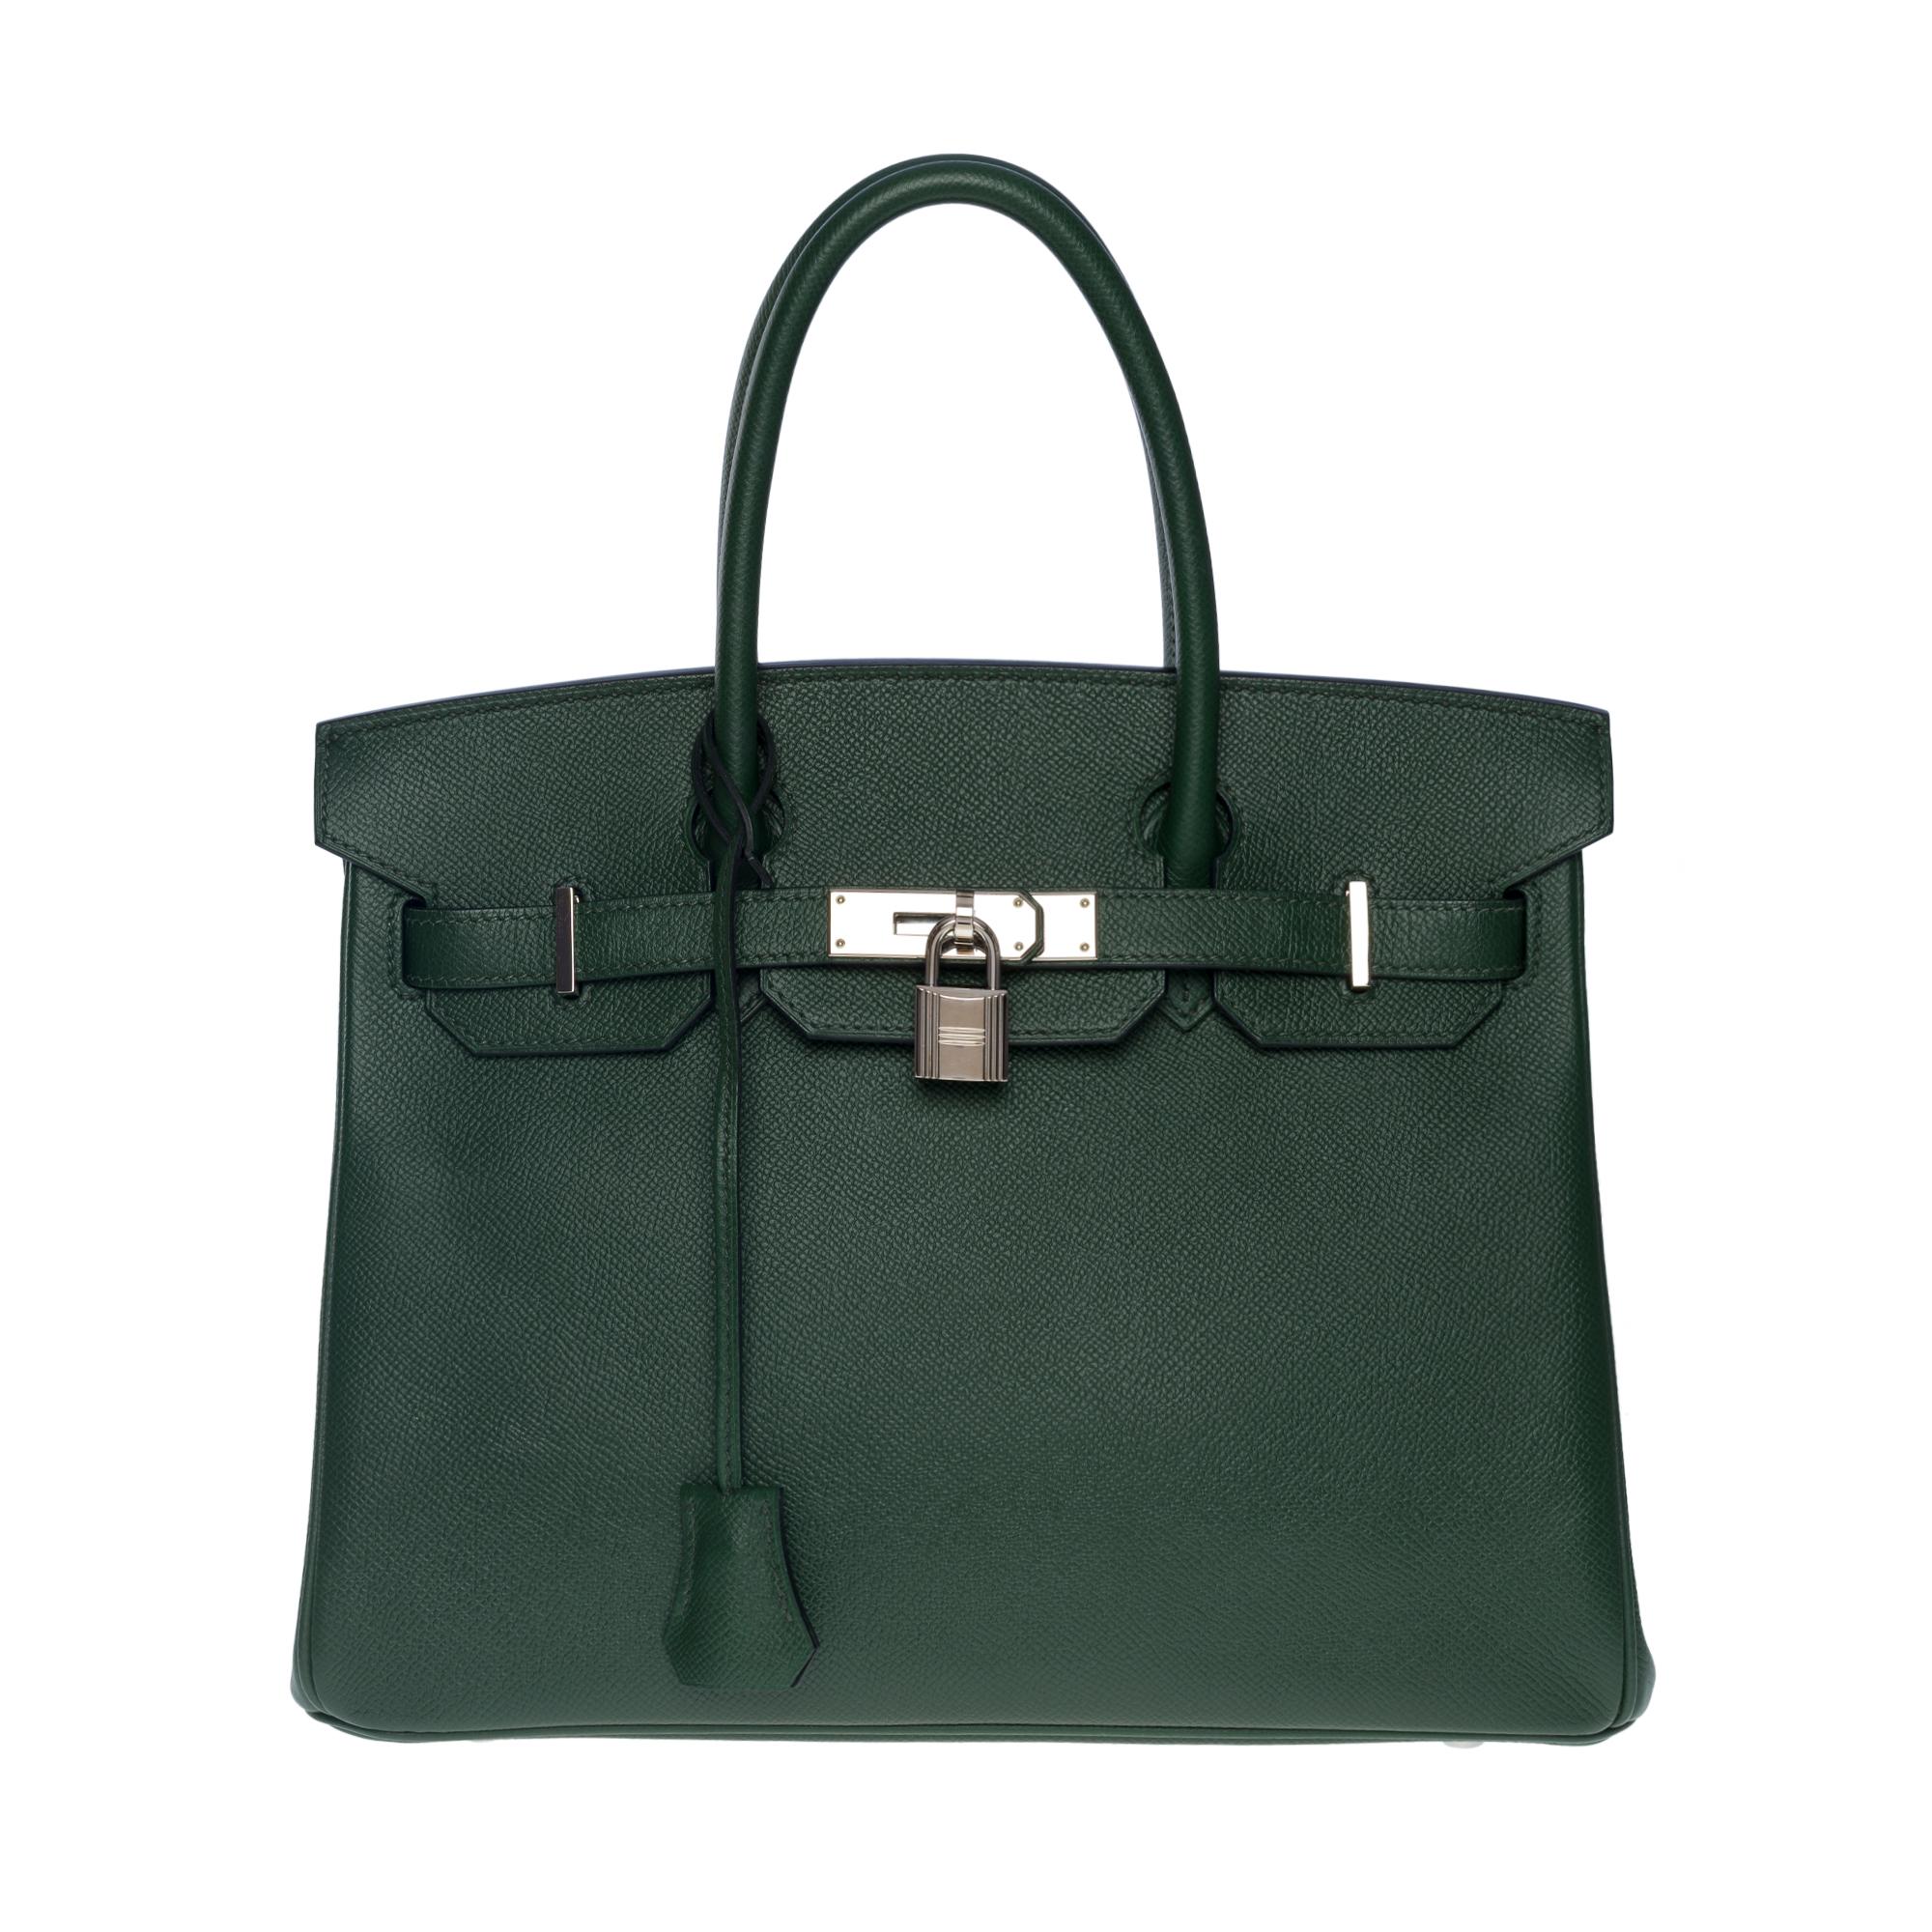 Exceptional & Rare Hermes Birkin 30 in Vert Anglais Epsom leather, palladium silver metal hardware, double green leather handle allowing a hand carry
Flap closure
Green leather lining, one zippered pocket, one patch pocket
Signature: 